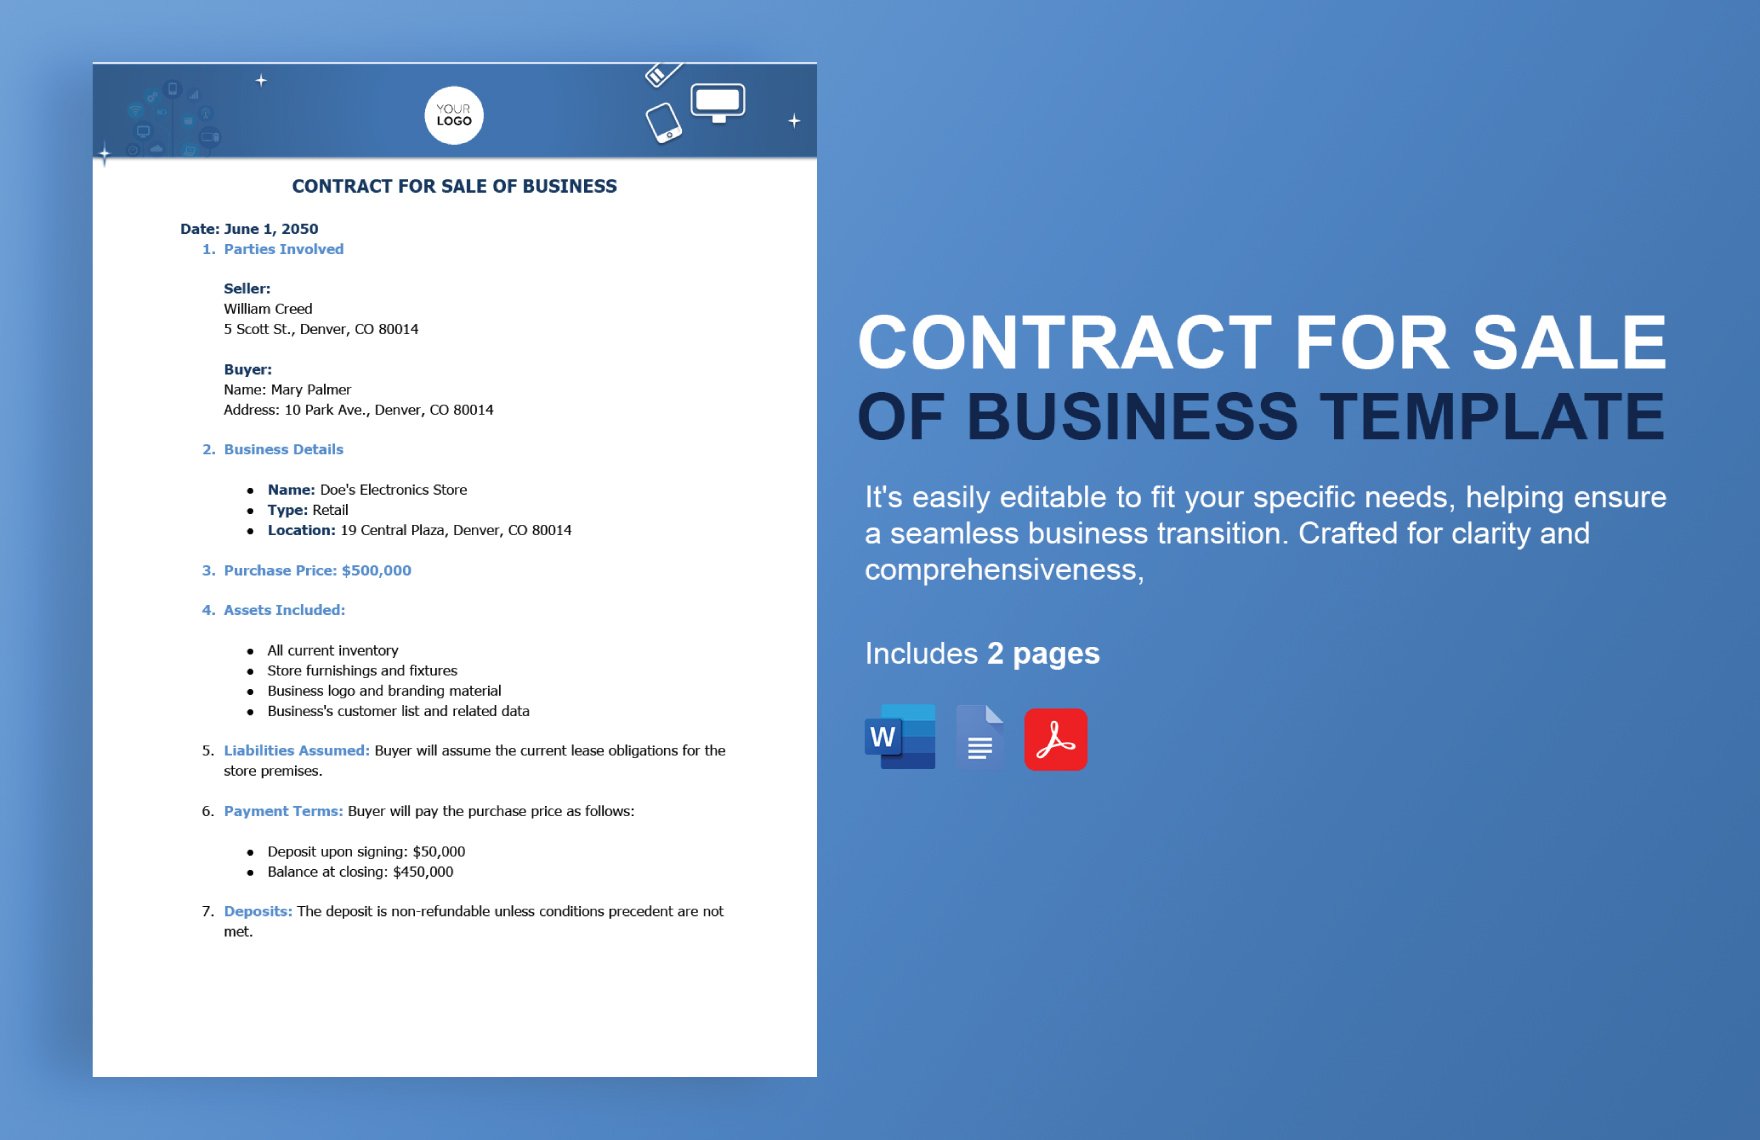 Contract for Sale of Business Template